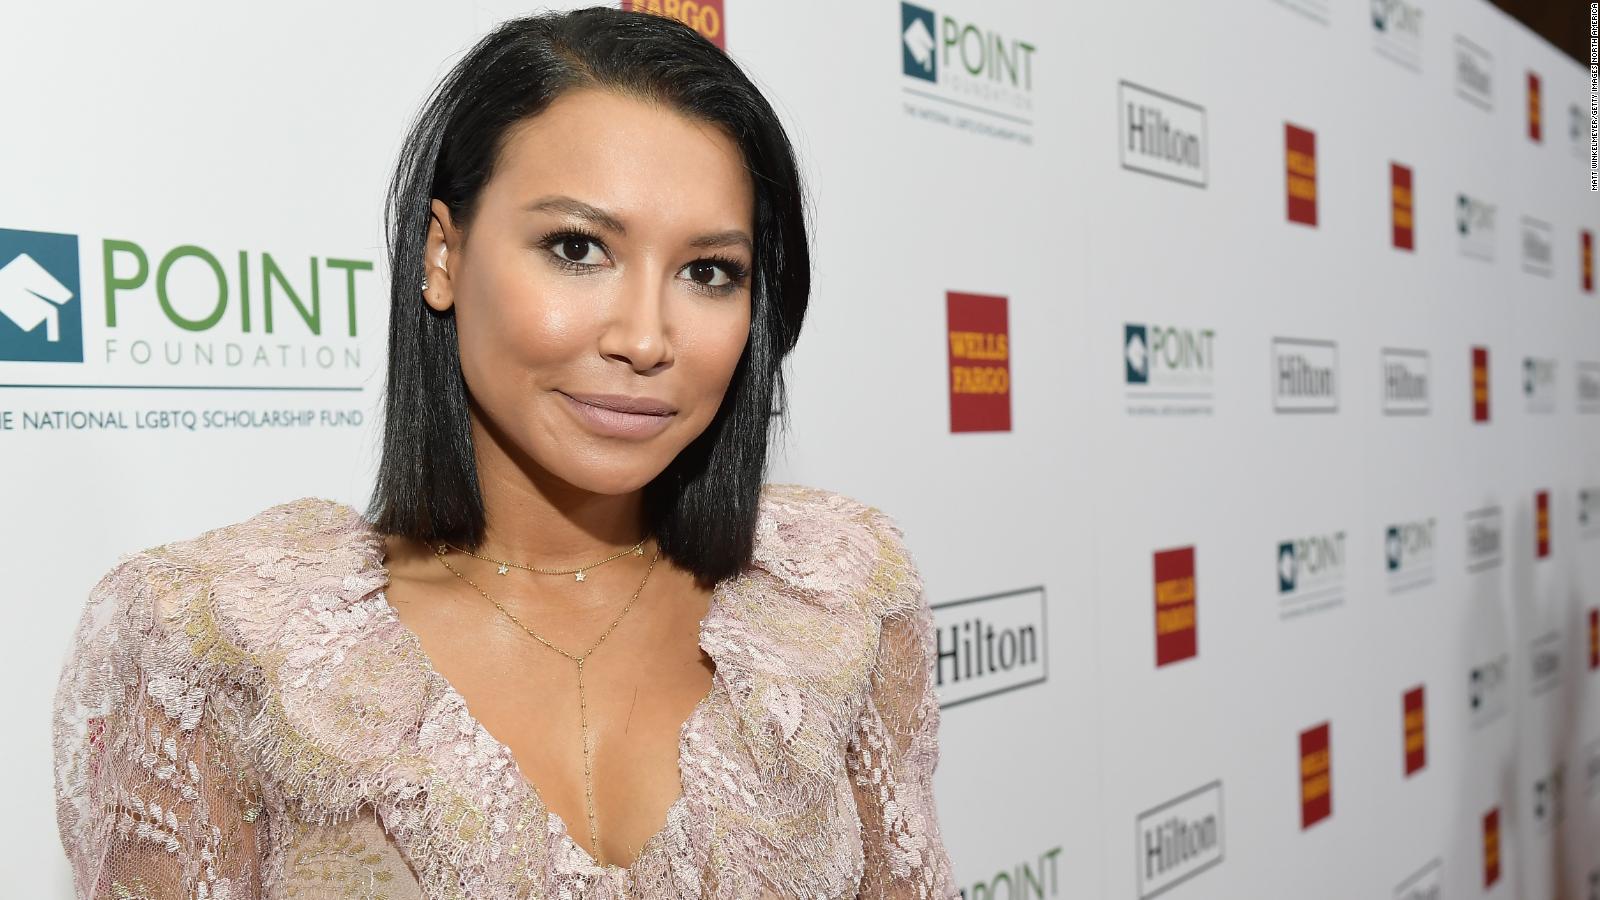 Naya Rivera Glee Actress Died After Saving Her 4 Year Old Son Authorities Say Cnn